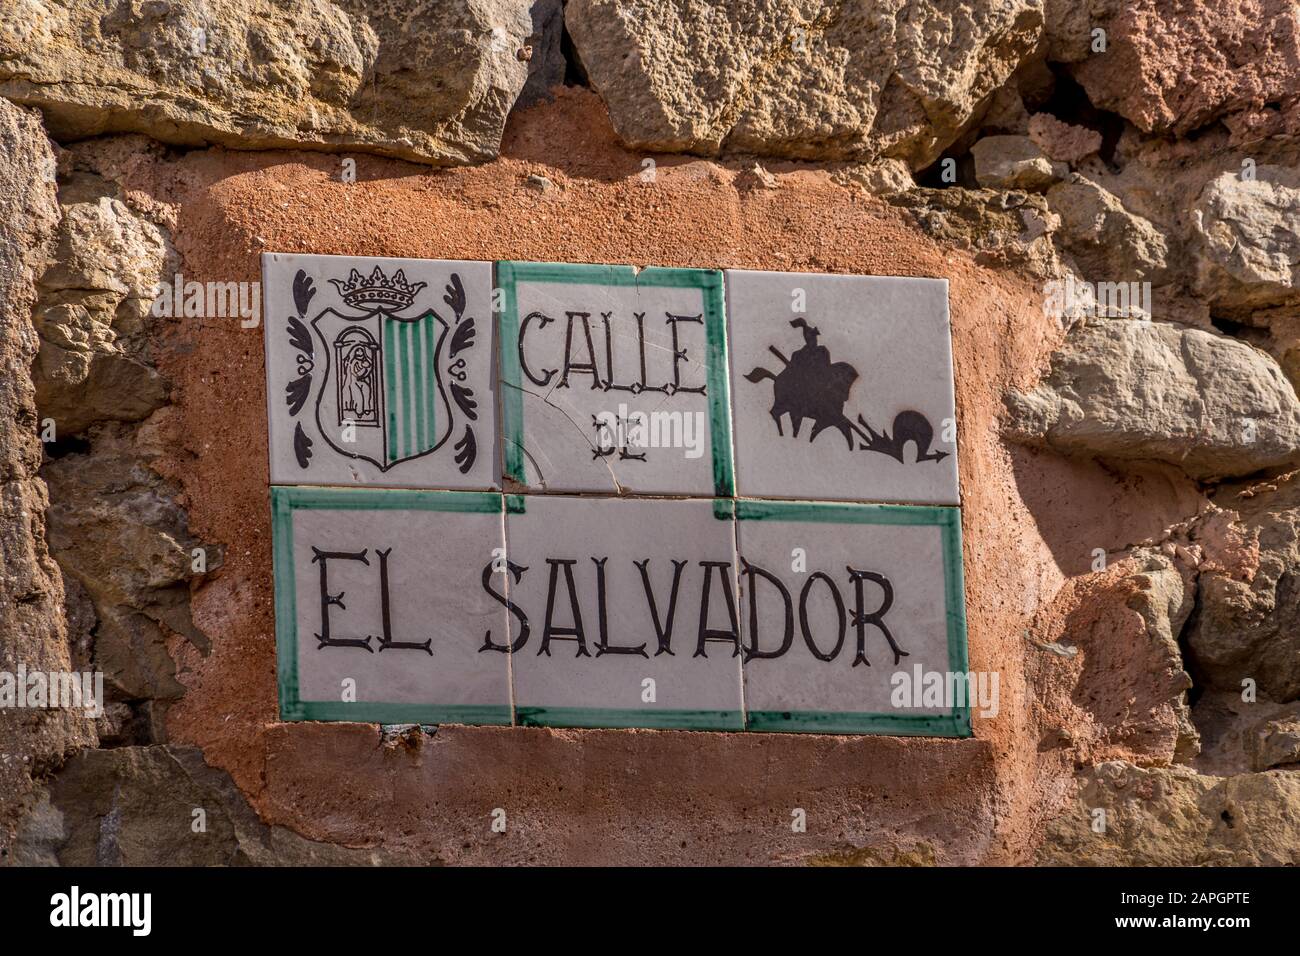 El Salvador the savior street sign with drawings of a knight and coat of arms in Albarracin Spain Stock Photo